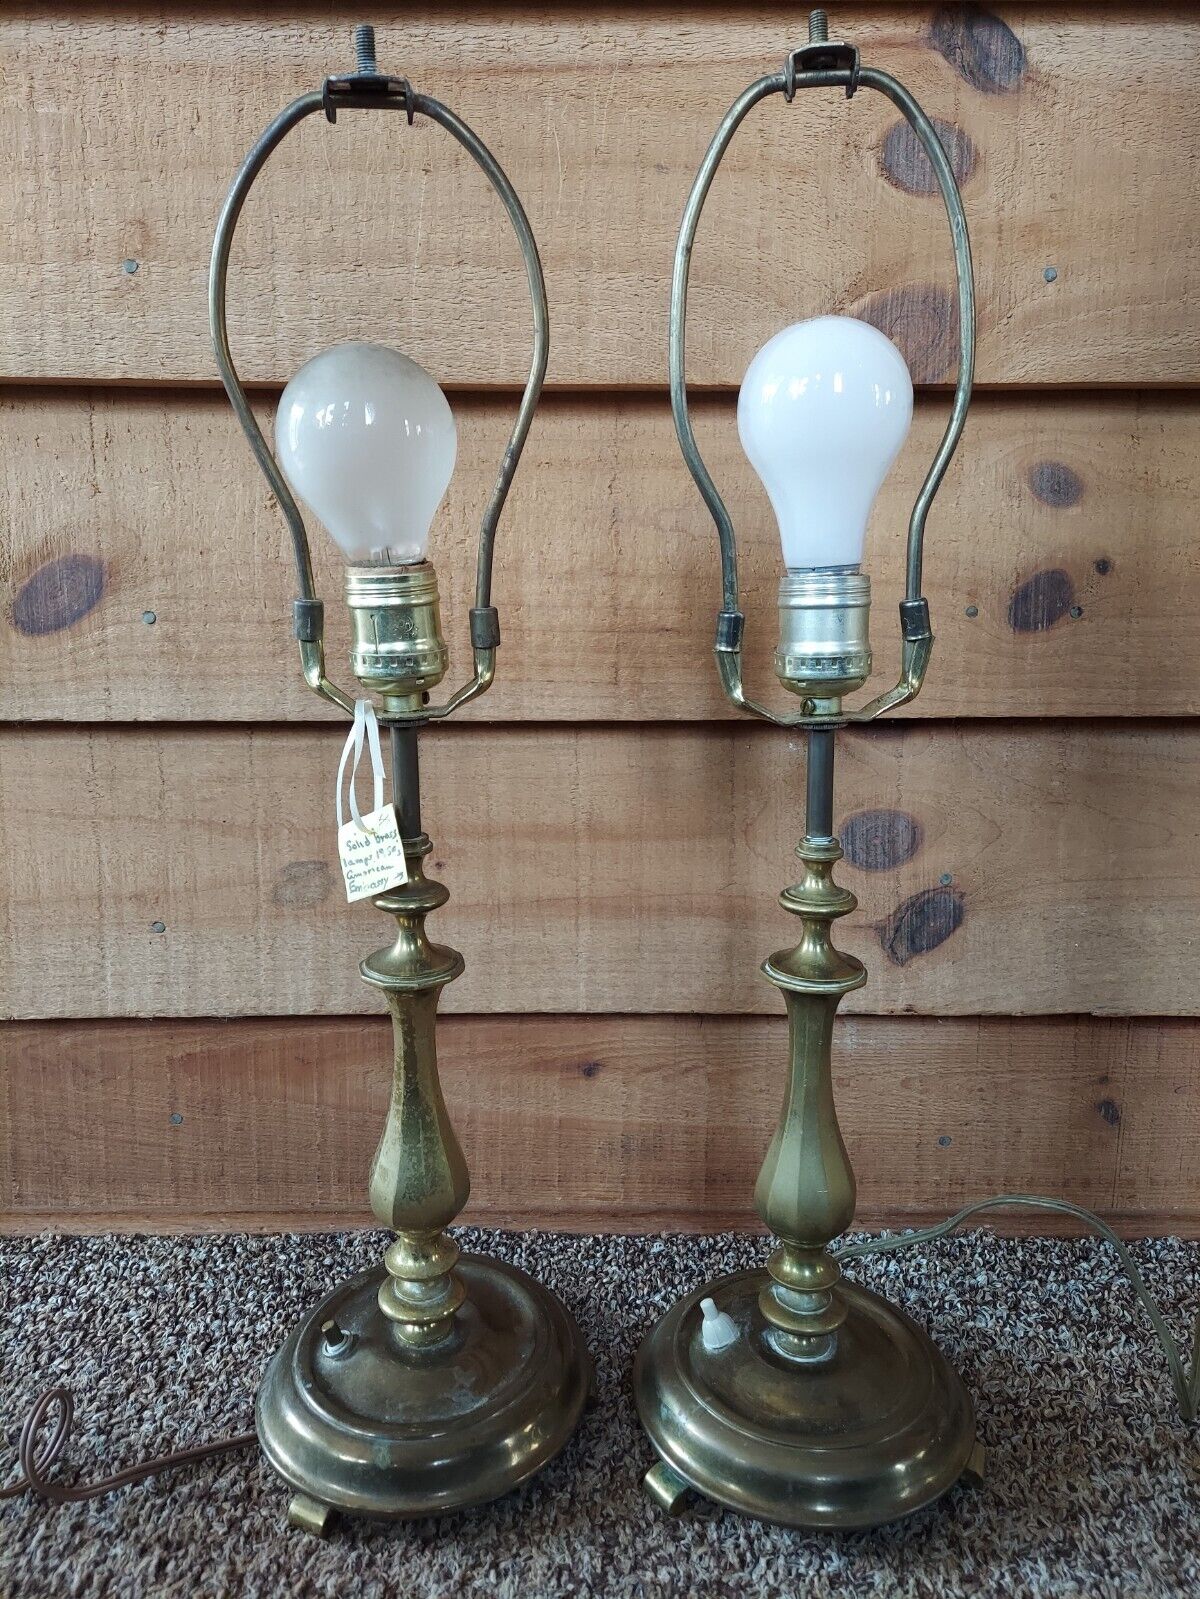 VINTAGE PAIR OF STIFFEL STYLE BRASS TABLE LAMPS 1950\'S AMERICAN EMBASSY GERMANY